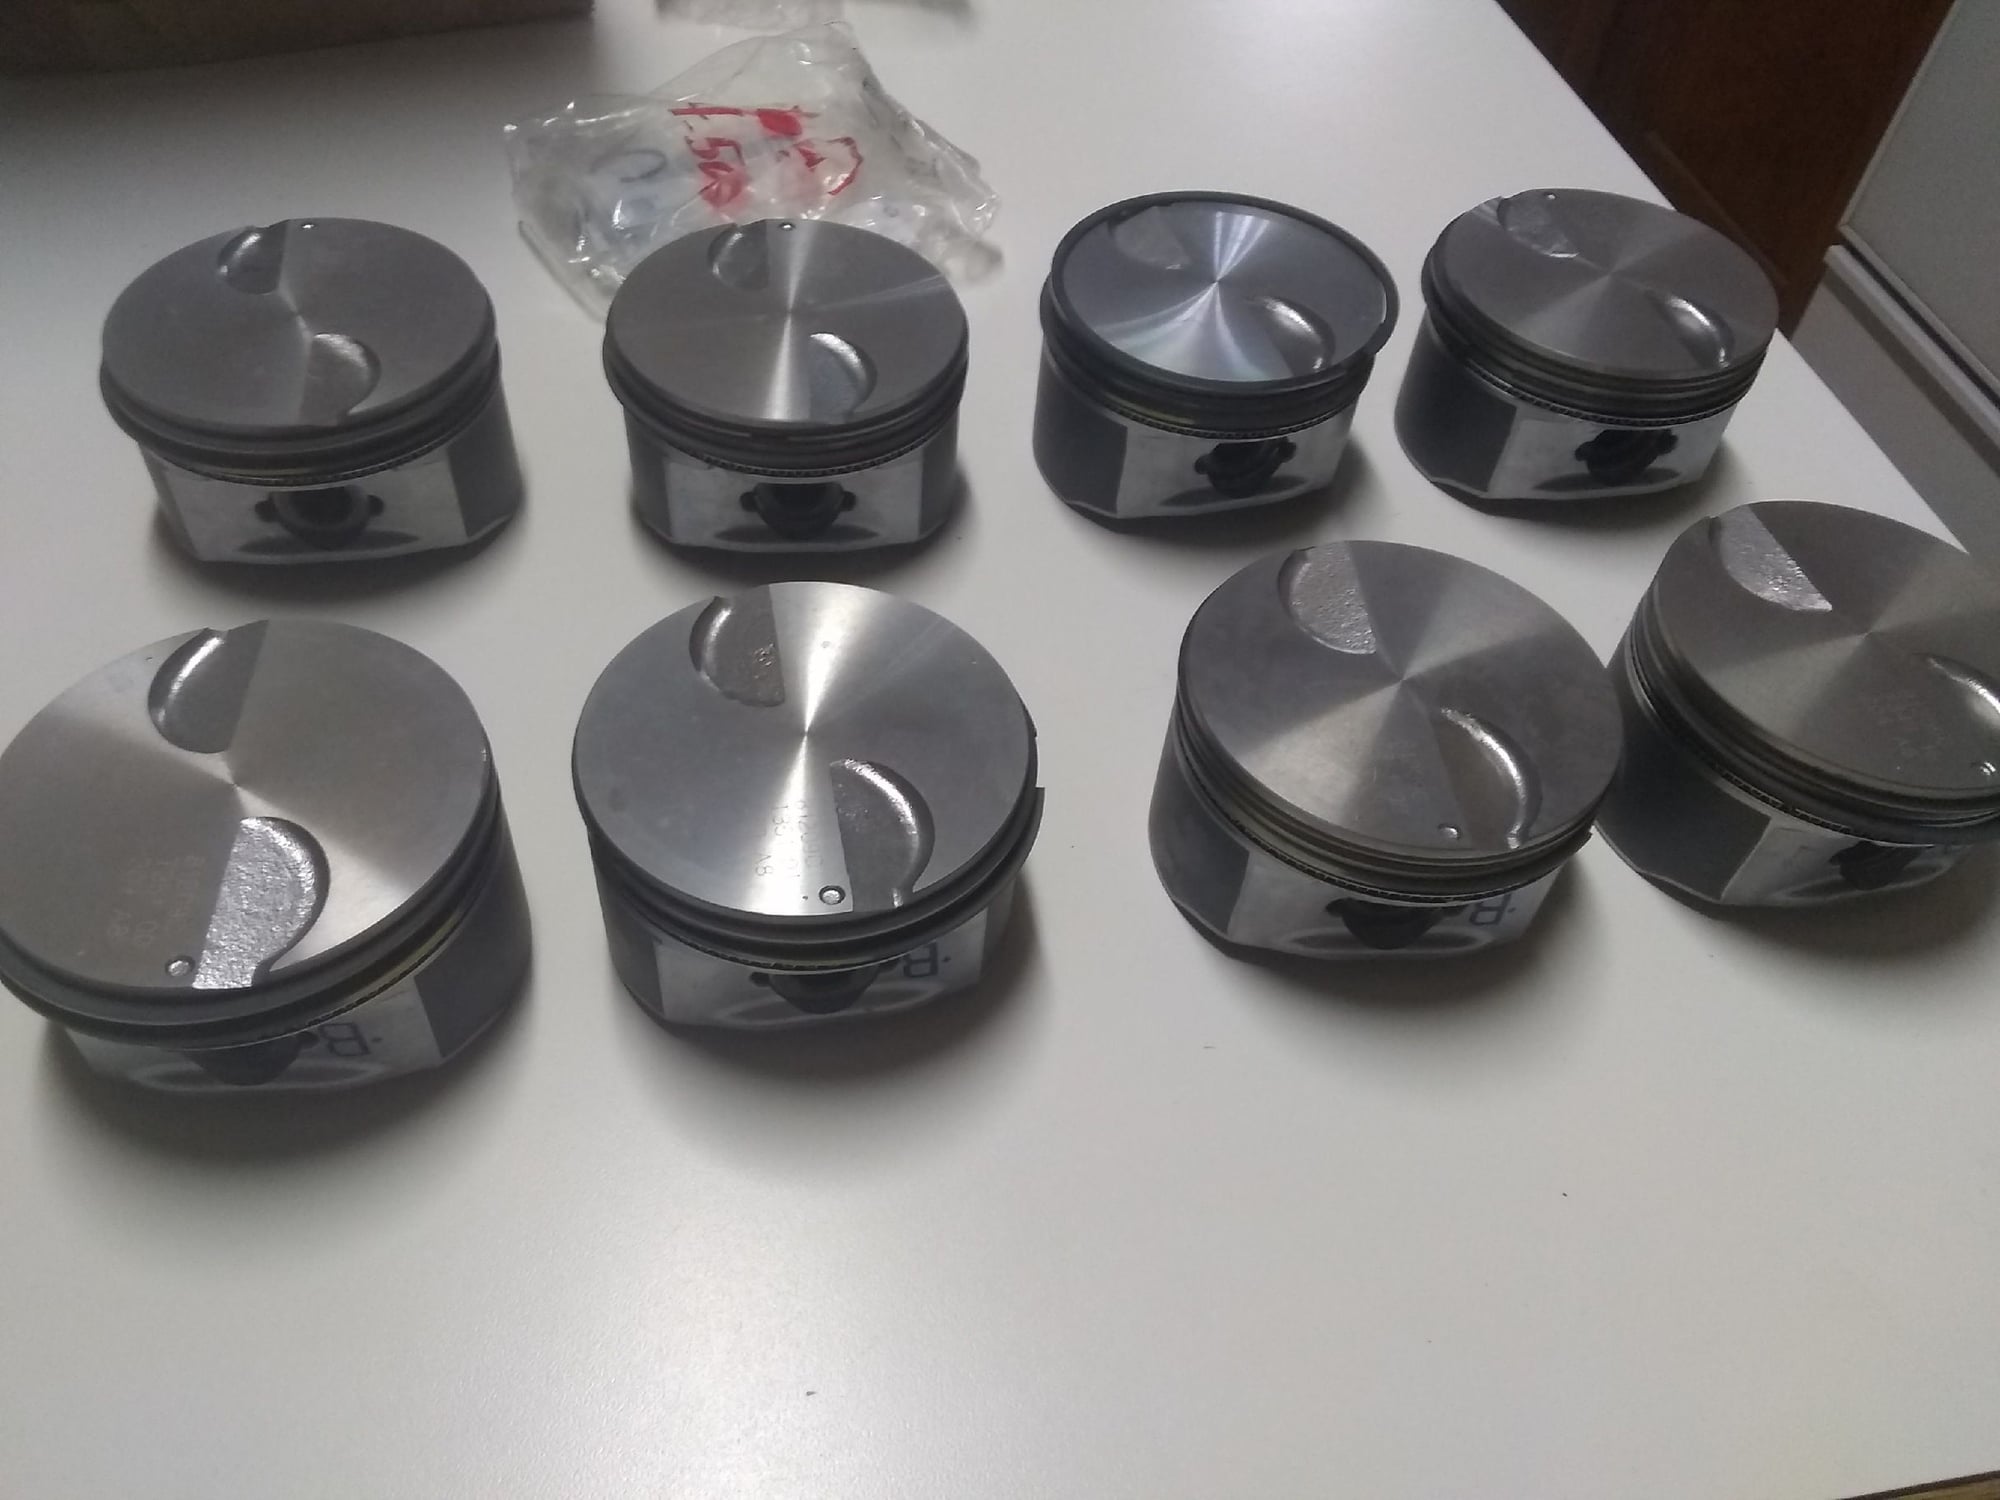 Engine - Internals - Selling: LH6 Gen 4 factoy GM pistons with rings, wrist pins, and locks - Used - Manchaca, TX 78652, United States